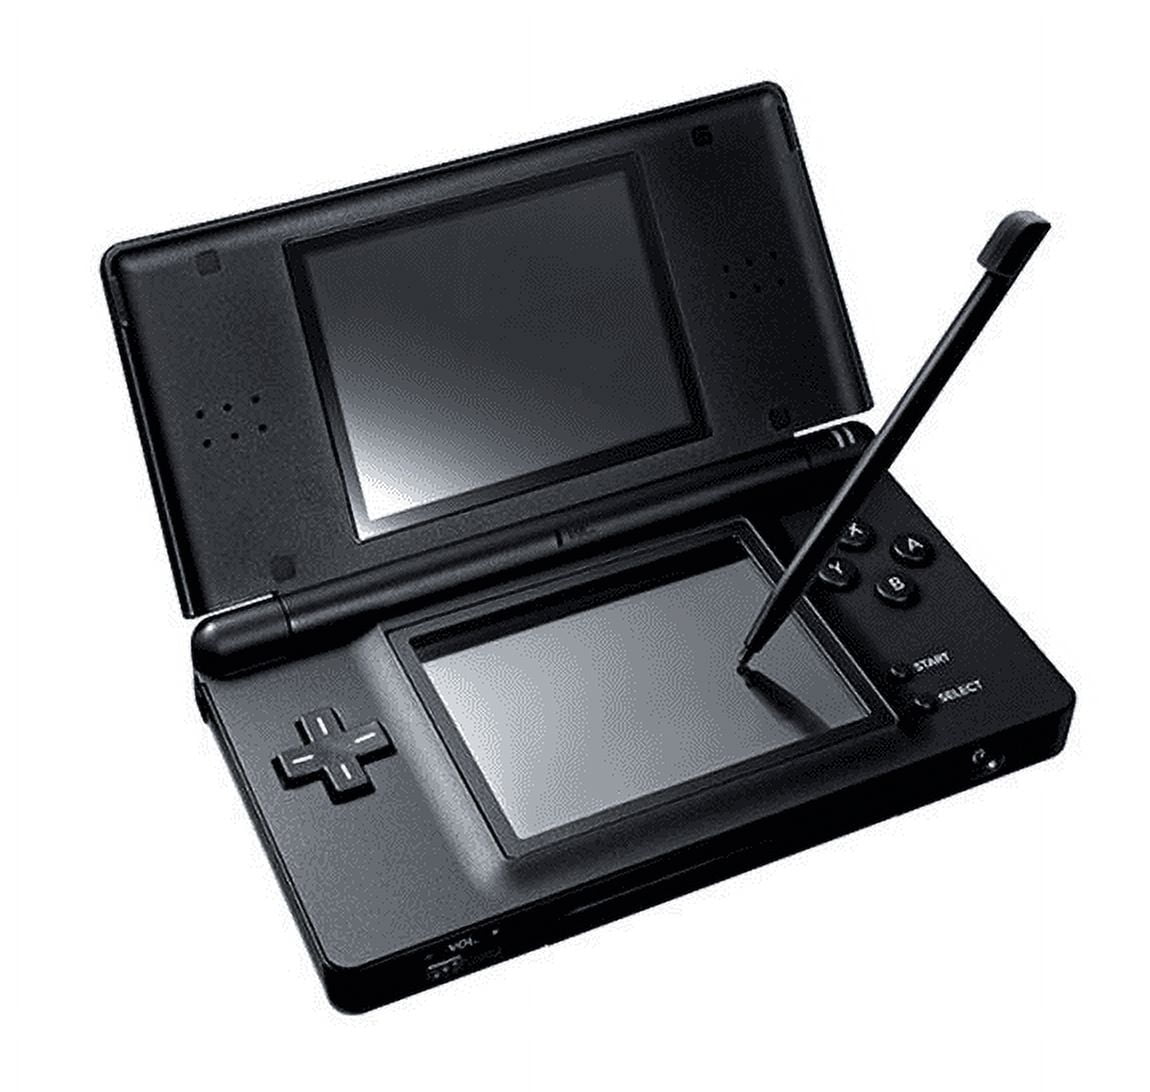 Nintendo DS DSi Original Console Black With Stylus & Charger + Hard Case  TESTED